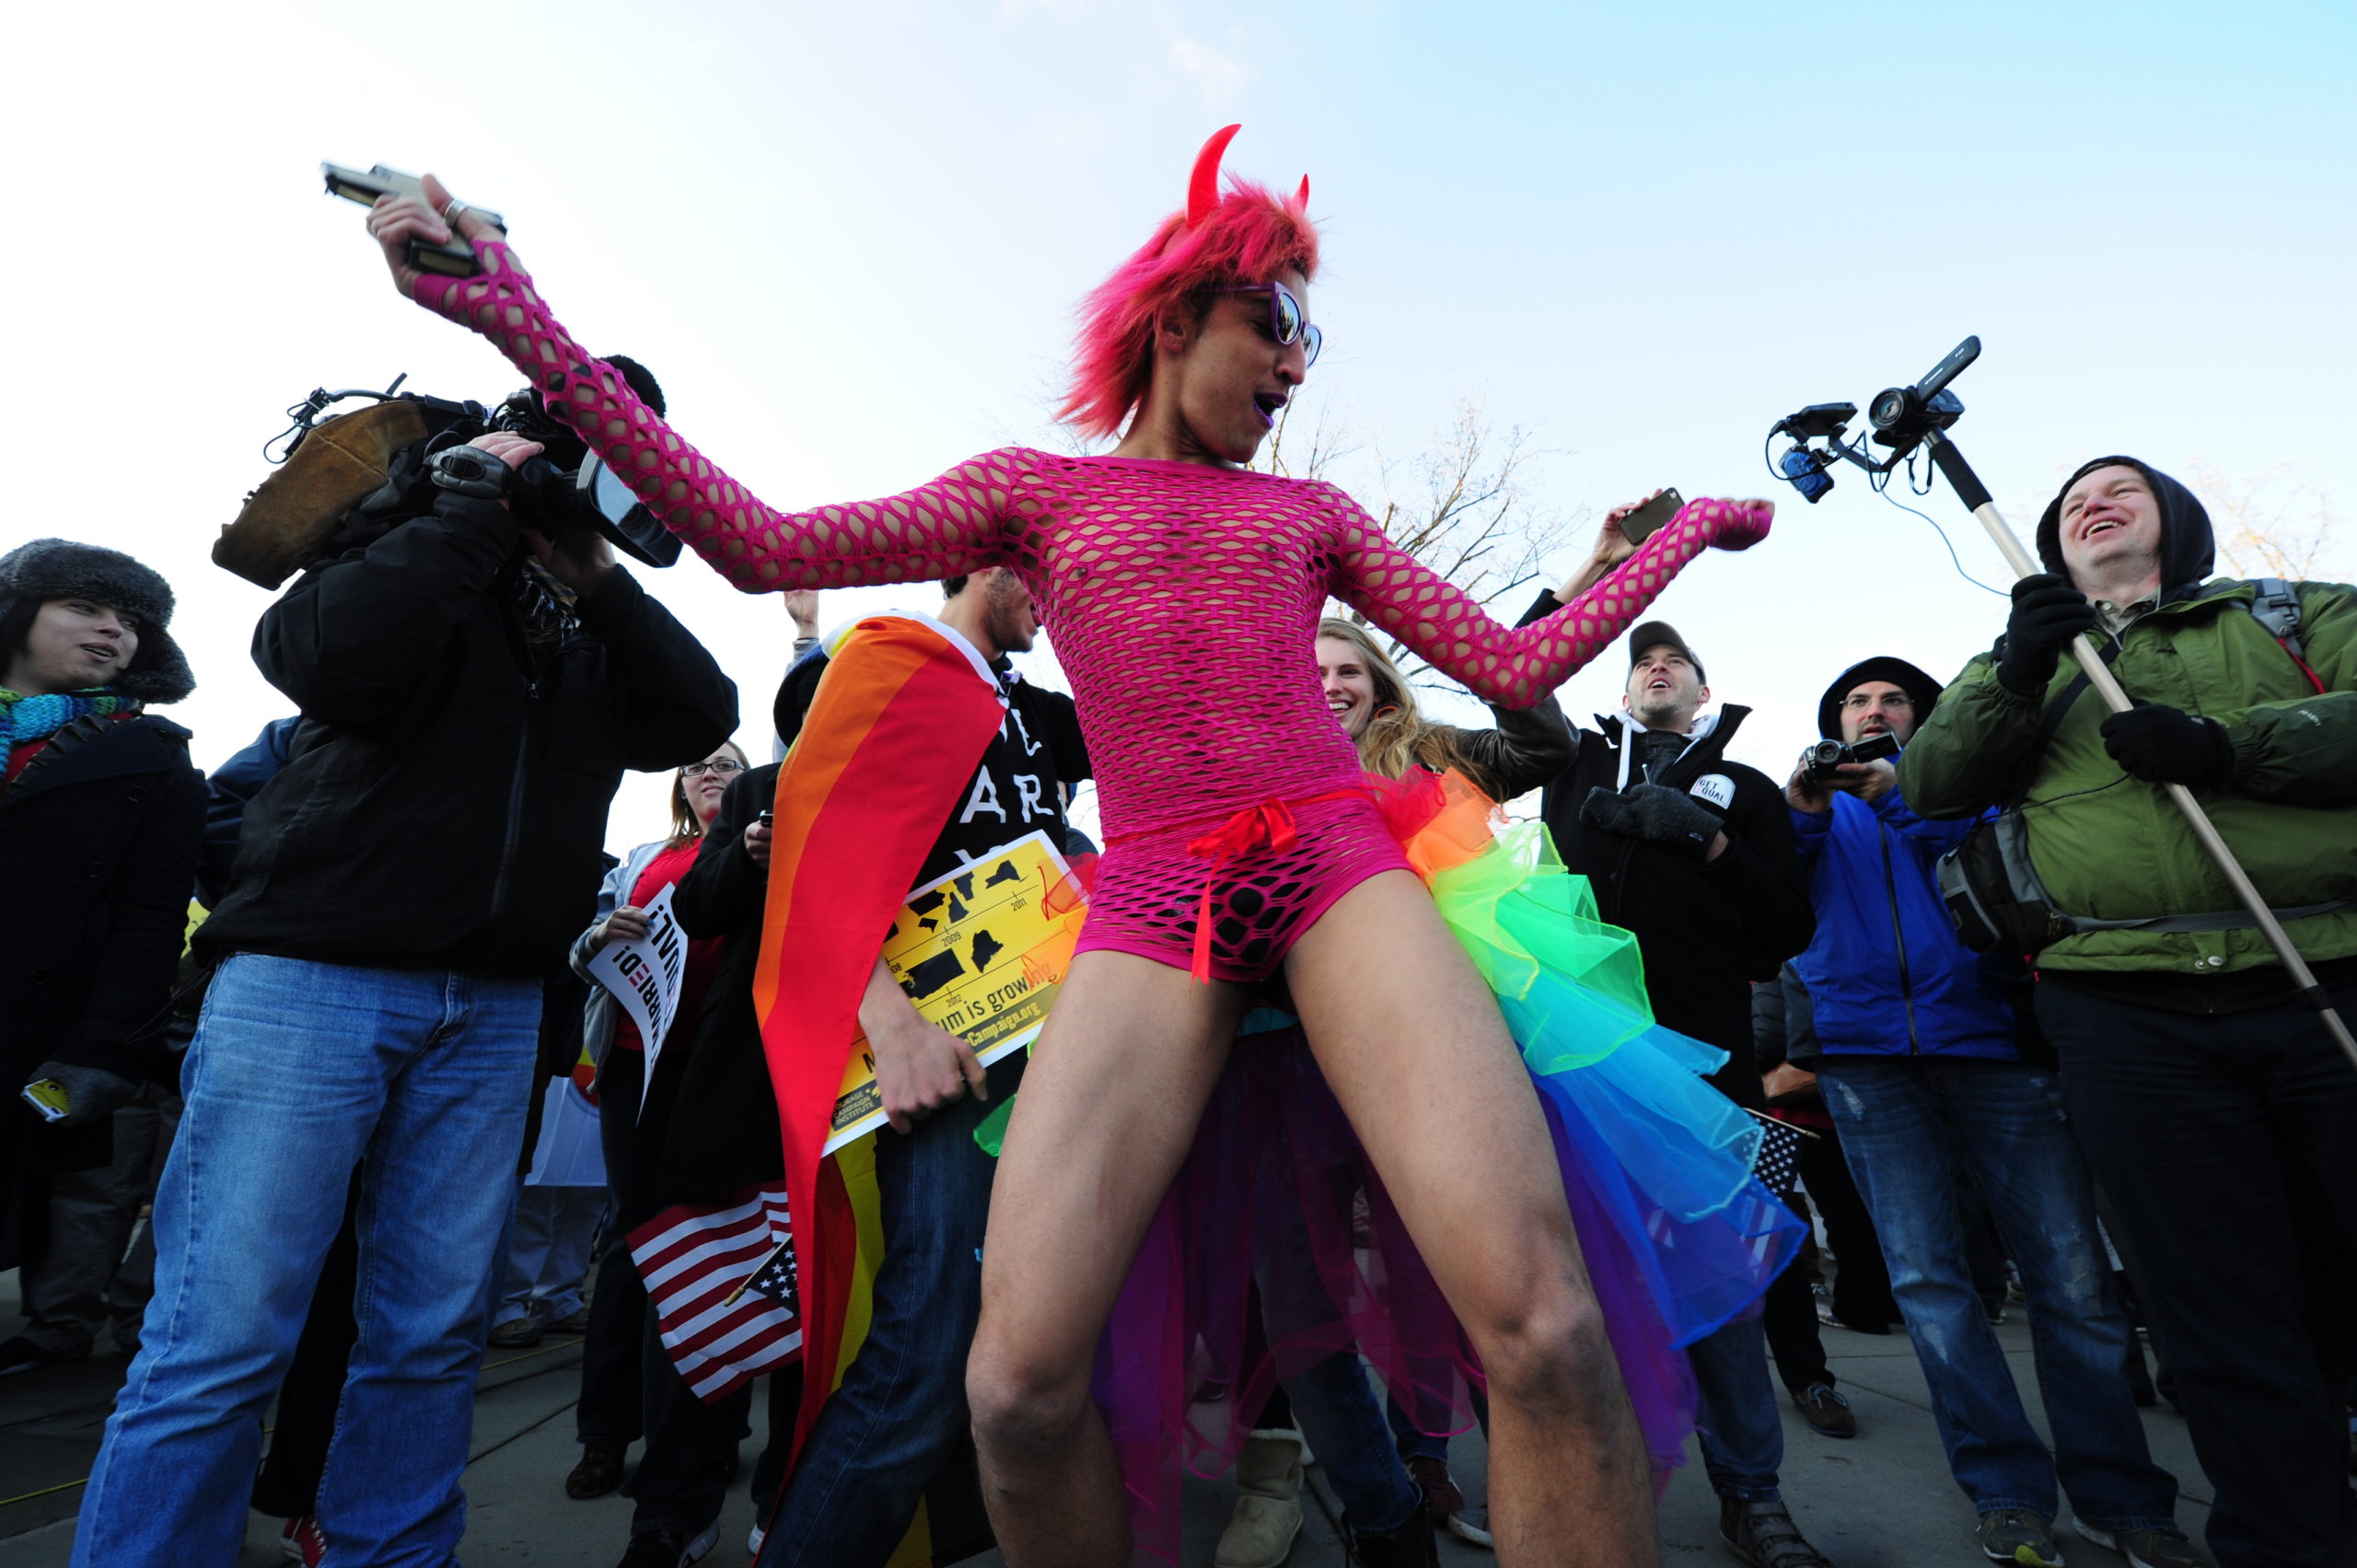 A man dressed in drag known as "Queen", from Florida, dances in front of the US Supreme Court on March 26, 2013 in Washington, DC. The Supreme Court, for the first time, takes up the delicate and divisive issue of gay marriage when the nine justices consider the legality of a California ballot initiative that limits marriage to opposite-sex couples.Tuesday will be the first of two days of oral arguments on the issue. On Wednesday, the court will consider the 1996 federal Defense of Marriage Act (DOMA), which limits the definition of marriage to opposite-sex couples. AFP PHOTO/Karen BLEIER (Photo credit should read KAREN BLEIER/AFP via Getty Images)